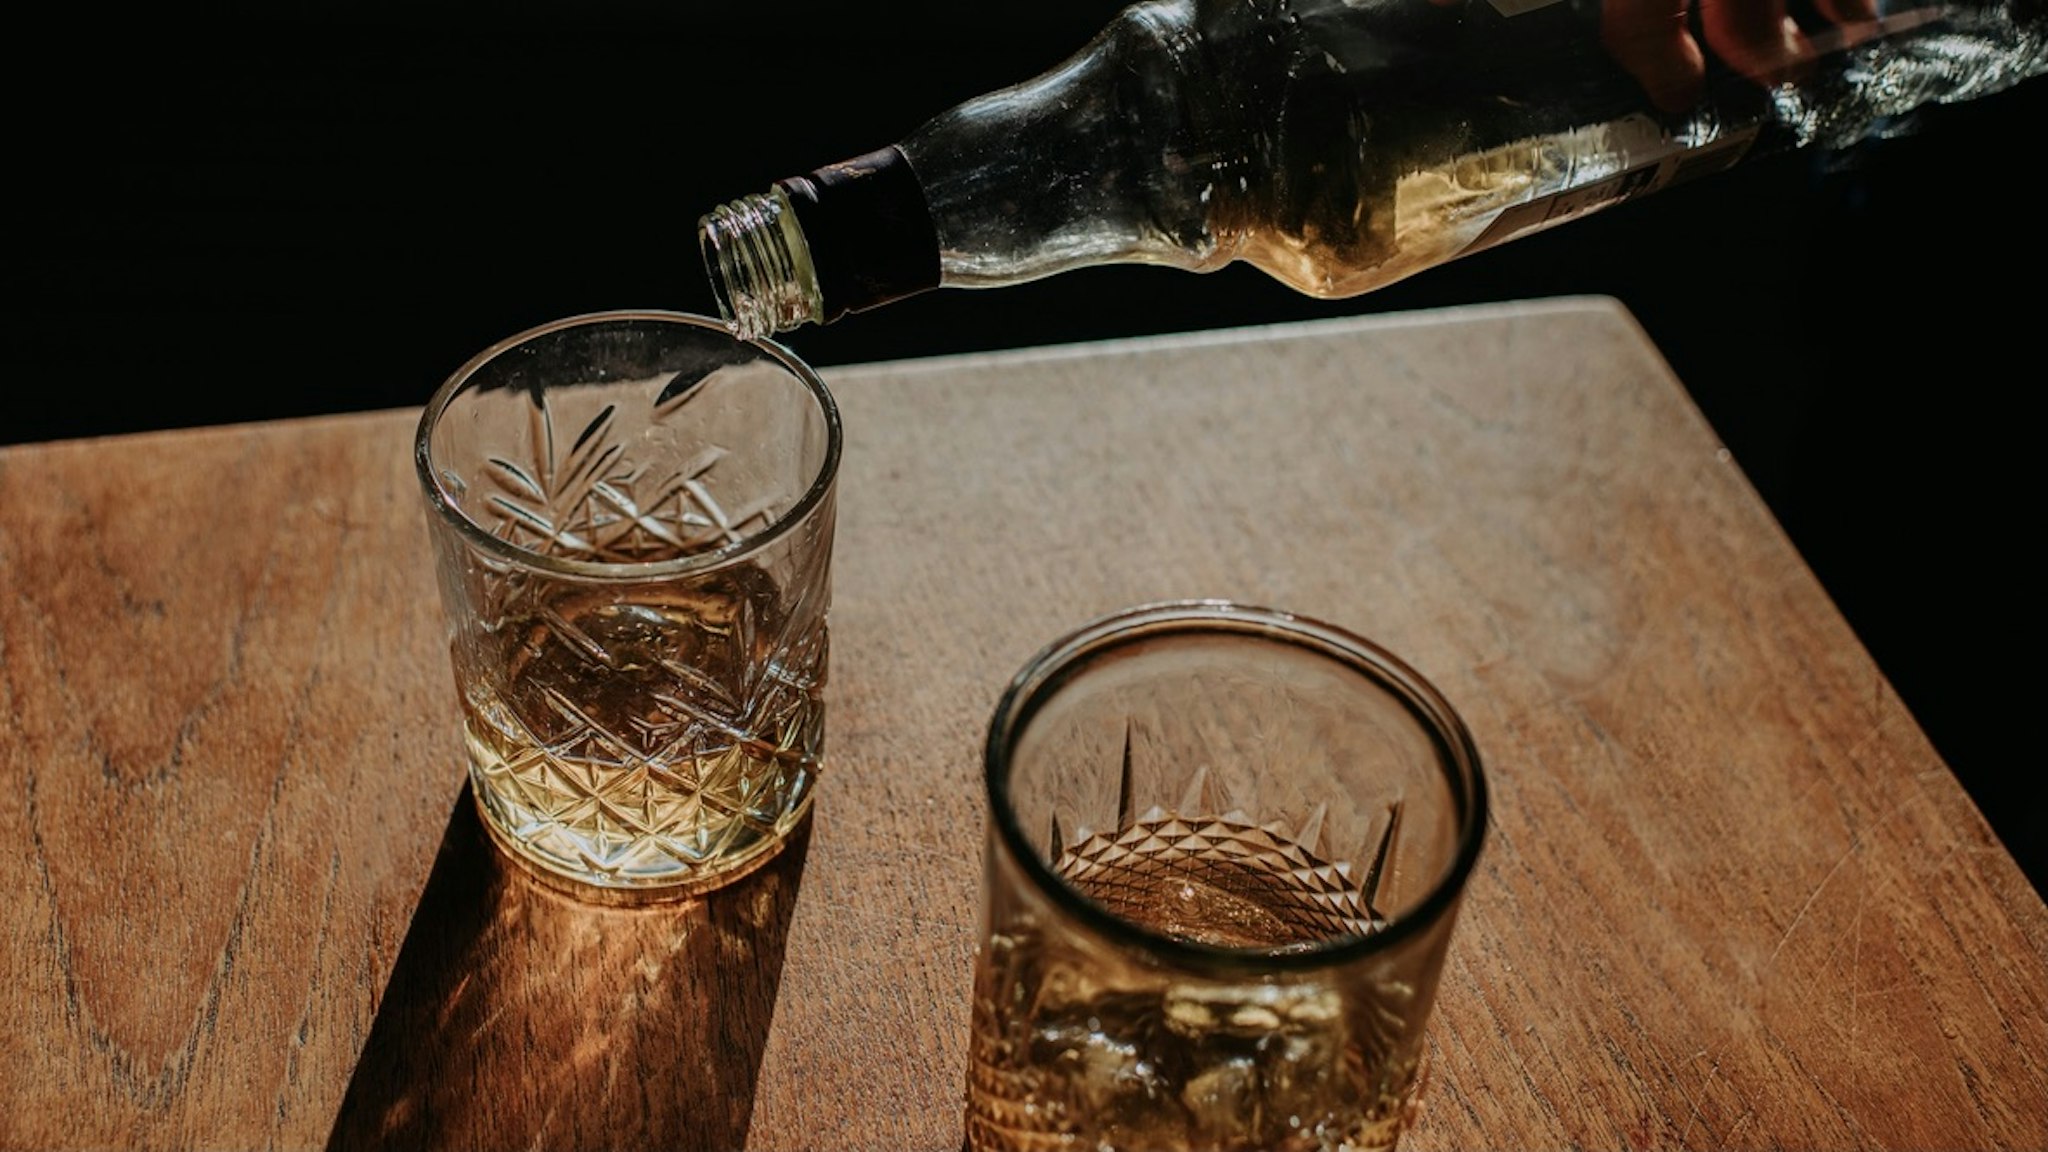 Whisky Pour from a bottle into a cut glass tumbler - stock photo A bottle of whisky is poured into a cut glass tumbler over ice. Space for copy. Catherine Falls Commercial via Getty Images